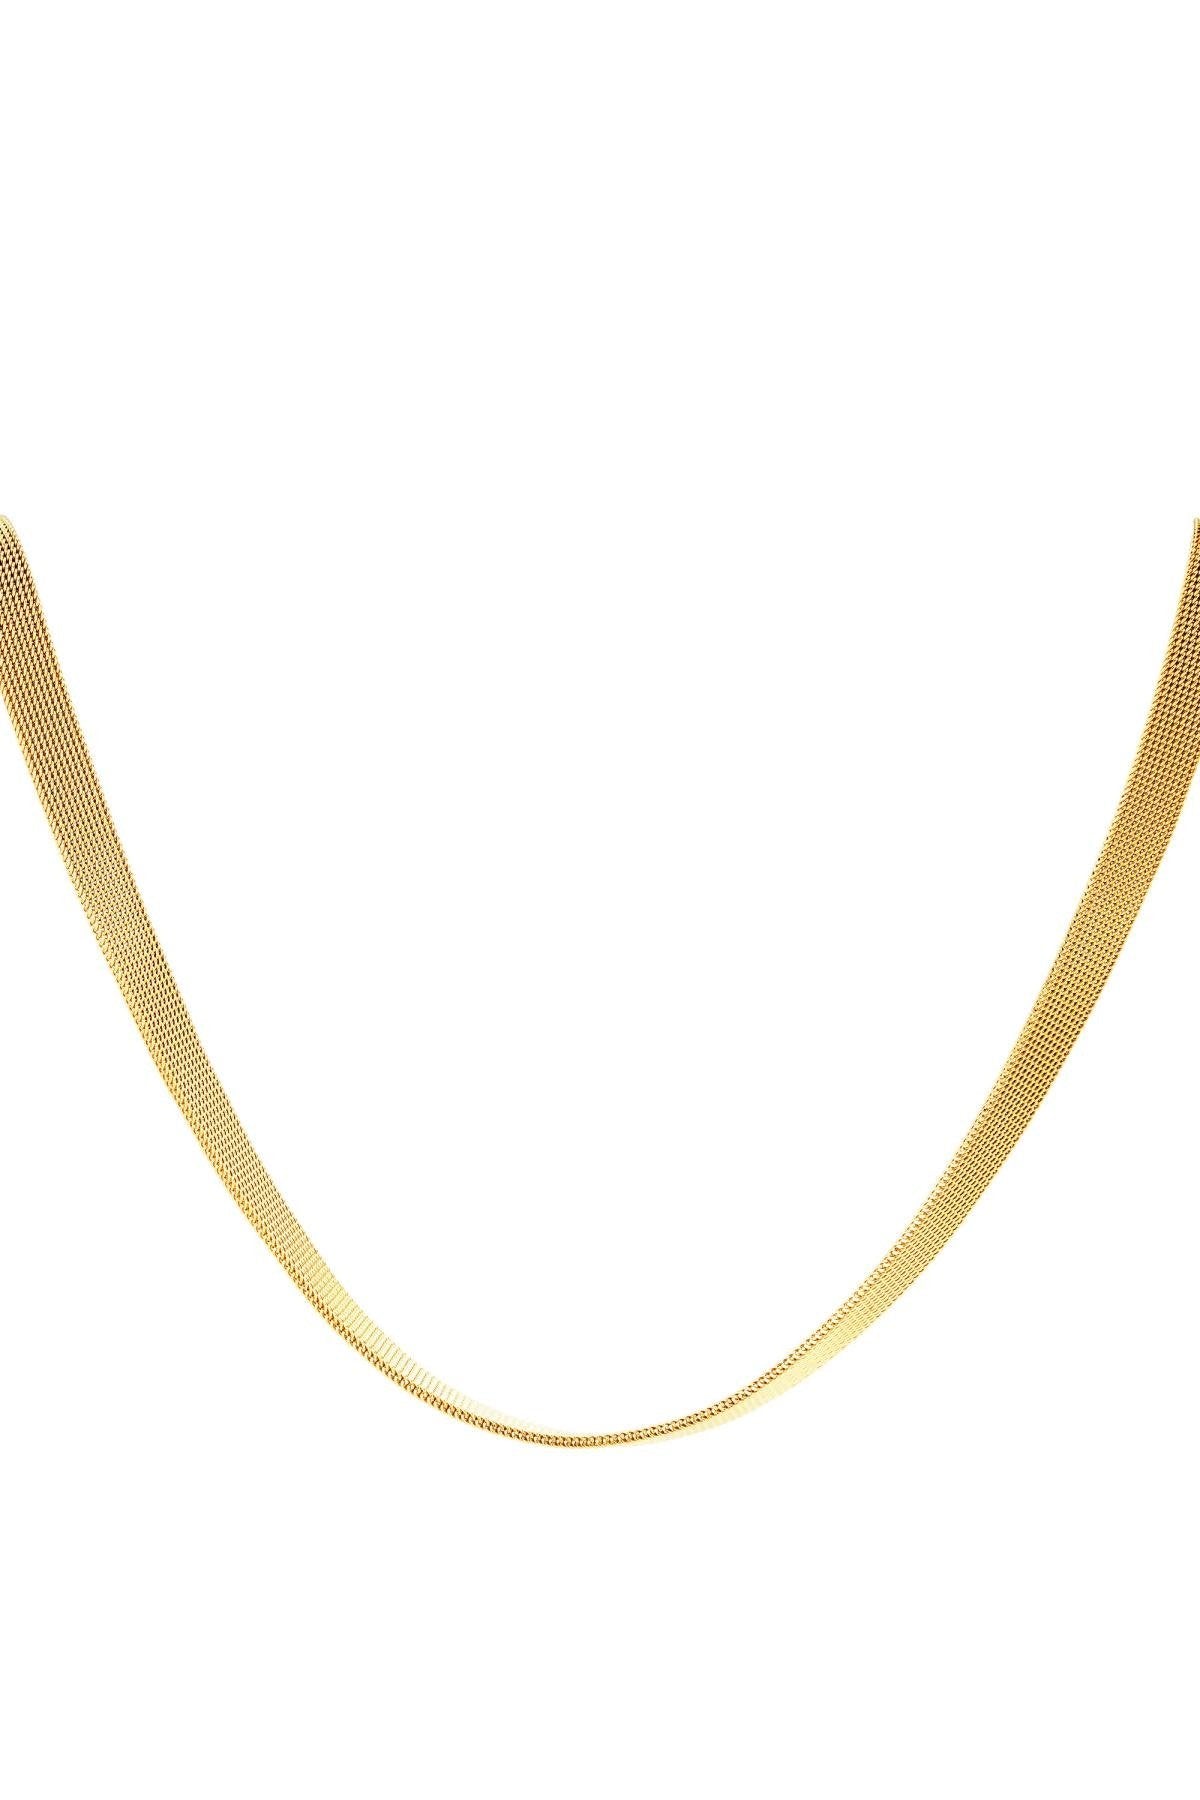 Stainless steel necklace elegant gold